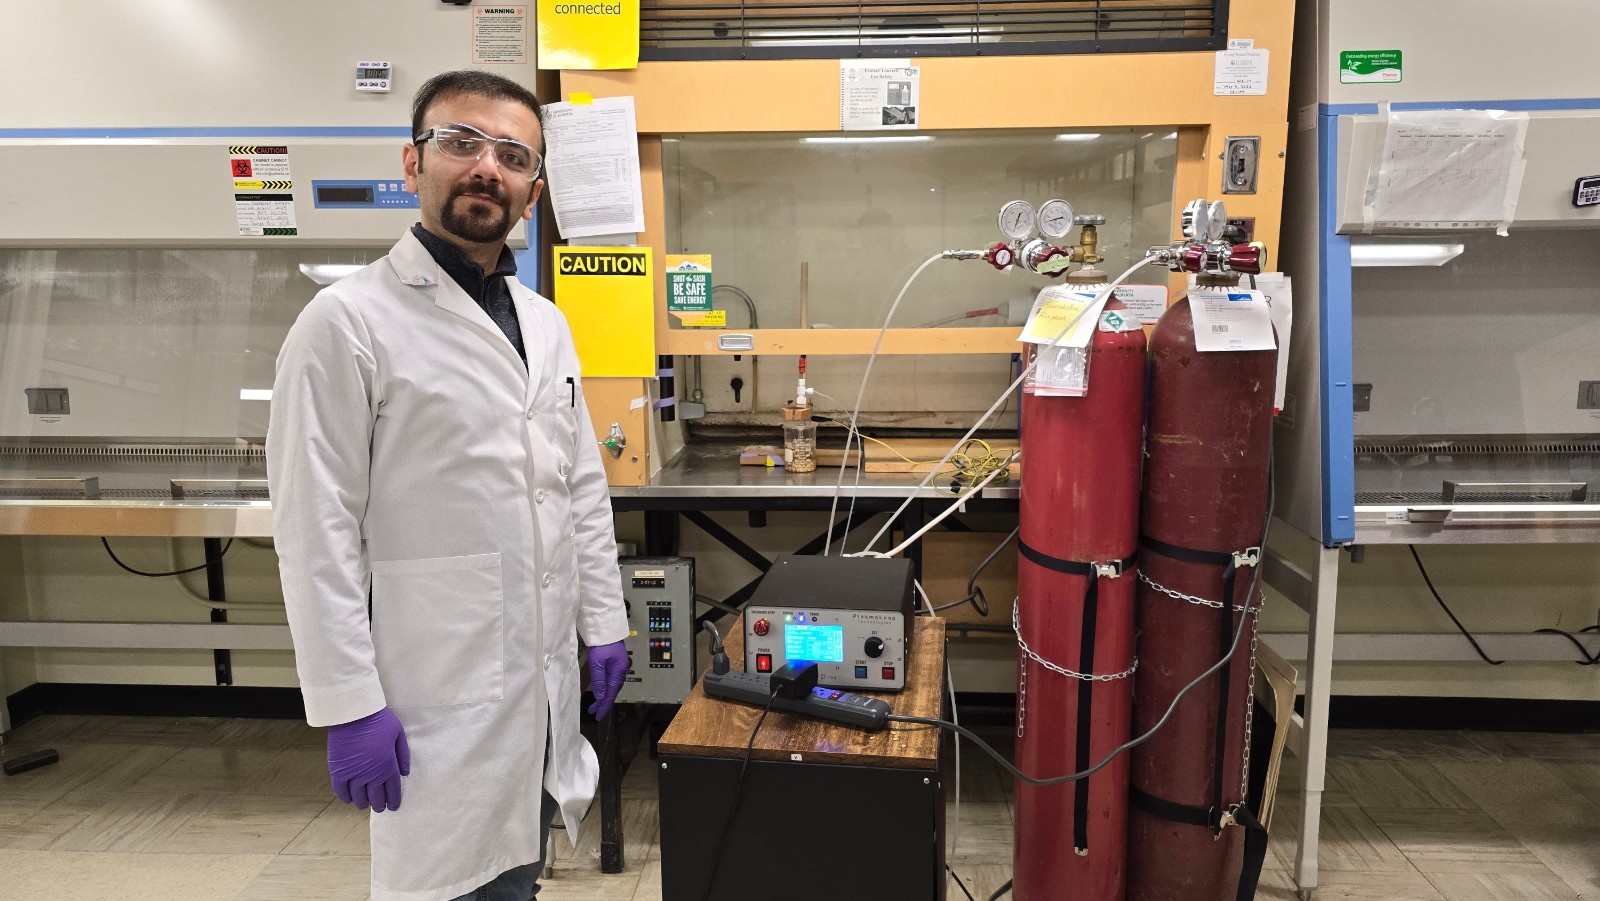 Researcher Ehsan Feizollahi demonstrates the cold plasma steeping technology he and his research team are developing to decontaminate barley. Barley grains are immersed in plasma-activated water in a beaker. (Photo: Supplied)